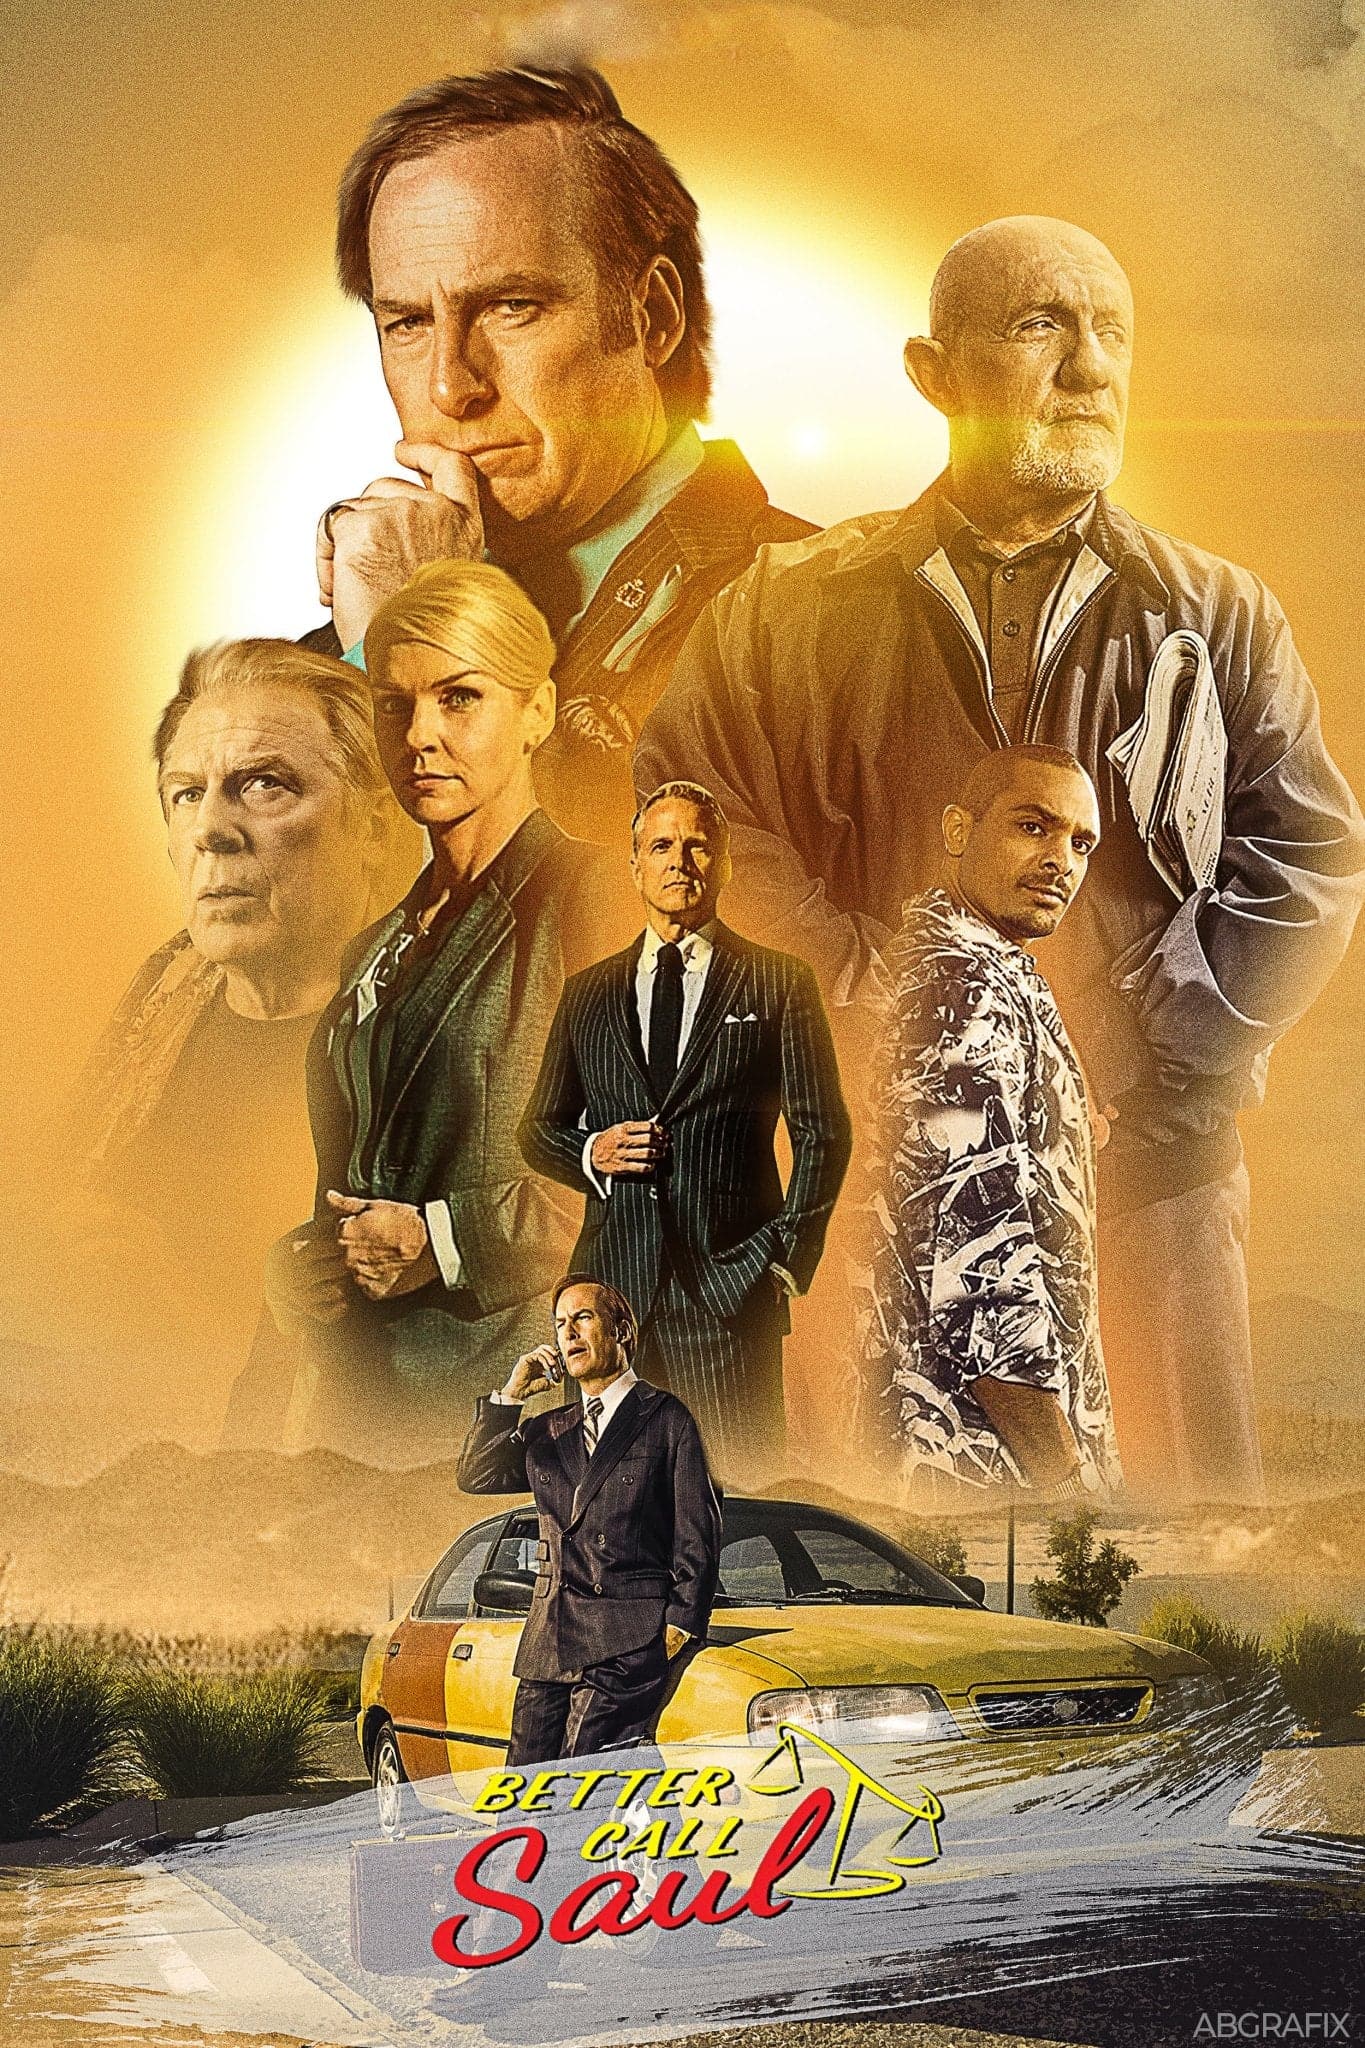 Better Call Saul ‘S01’ Poster - Posters Plug